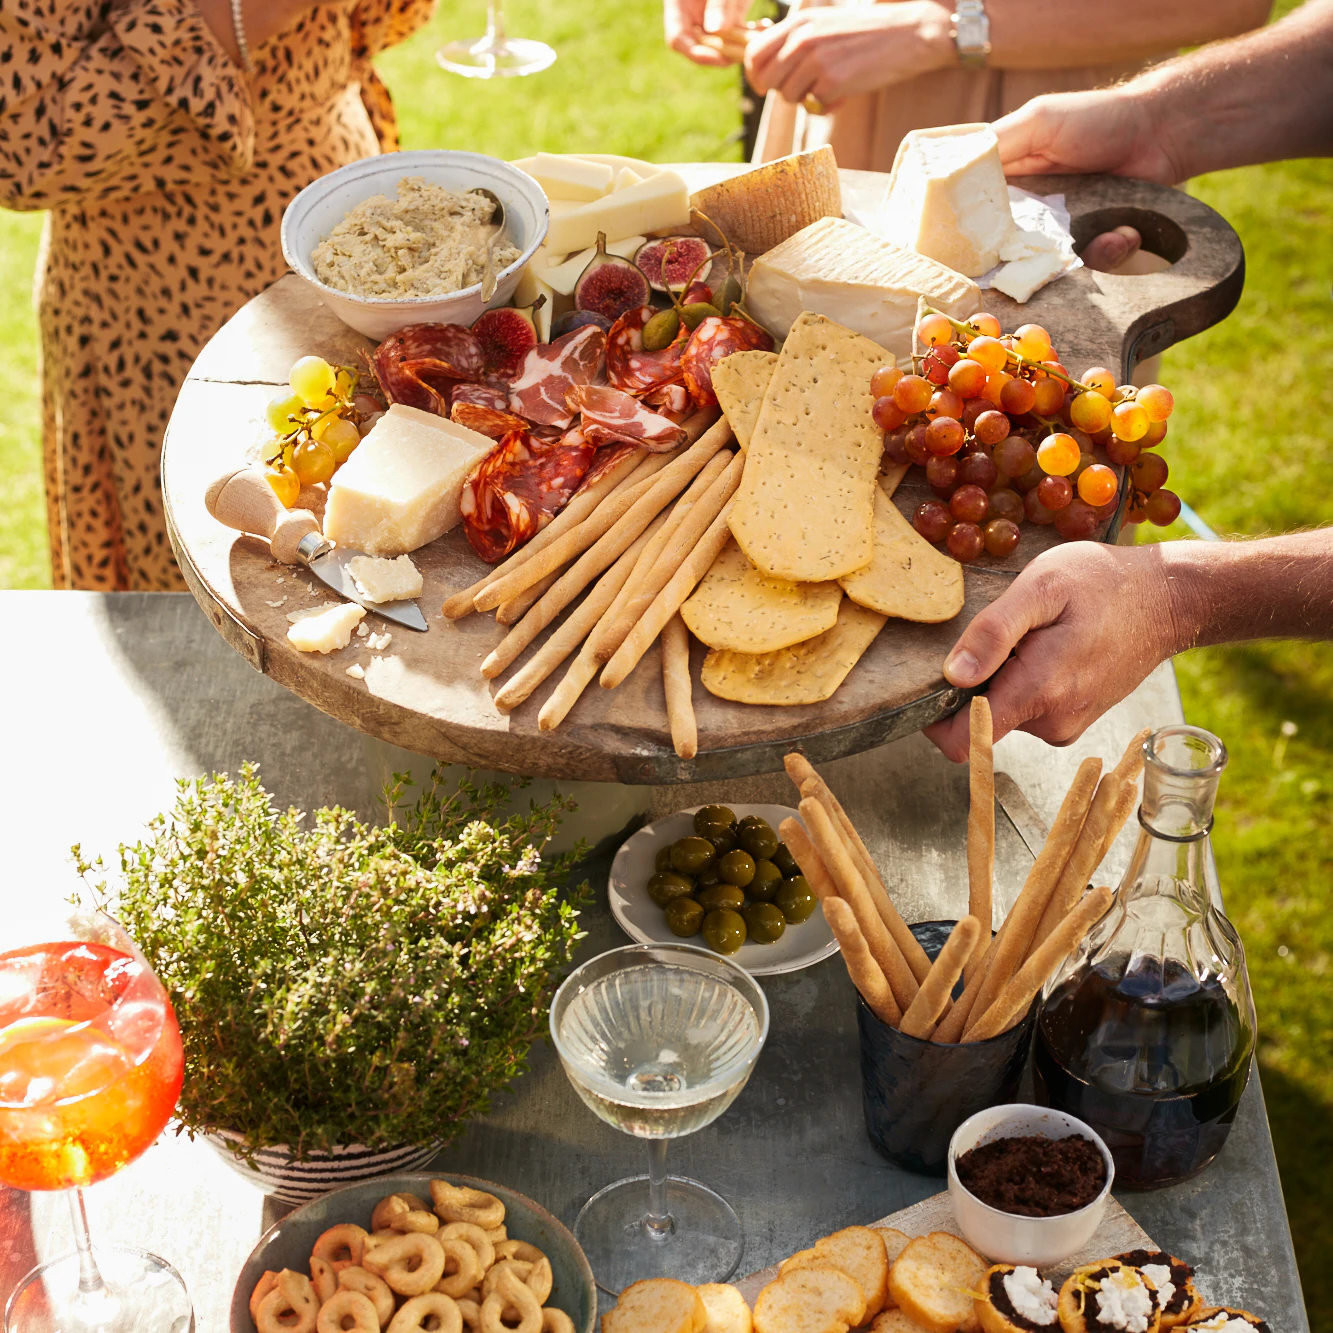 People reaching for food on an antipasti platter.